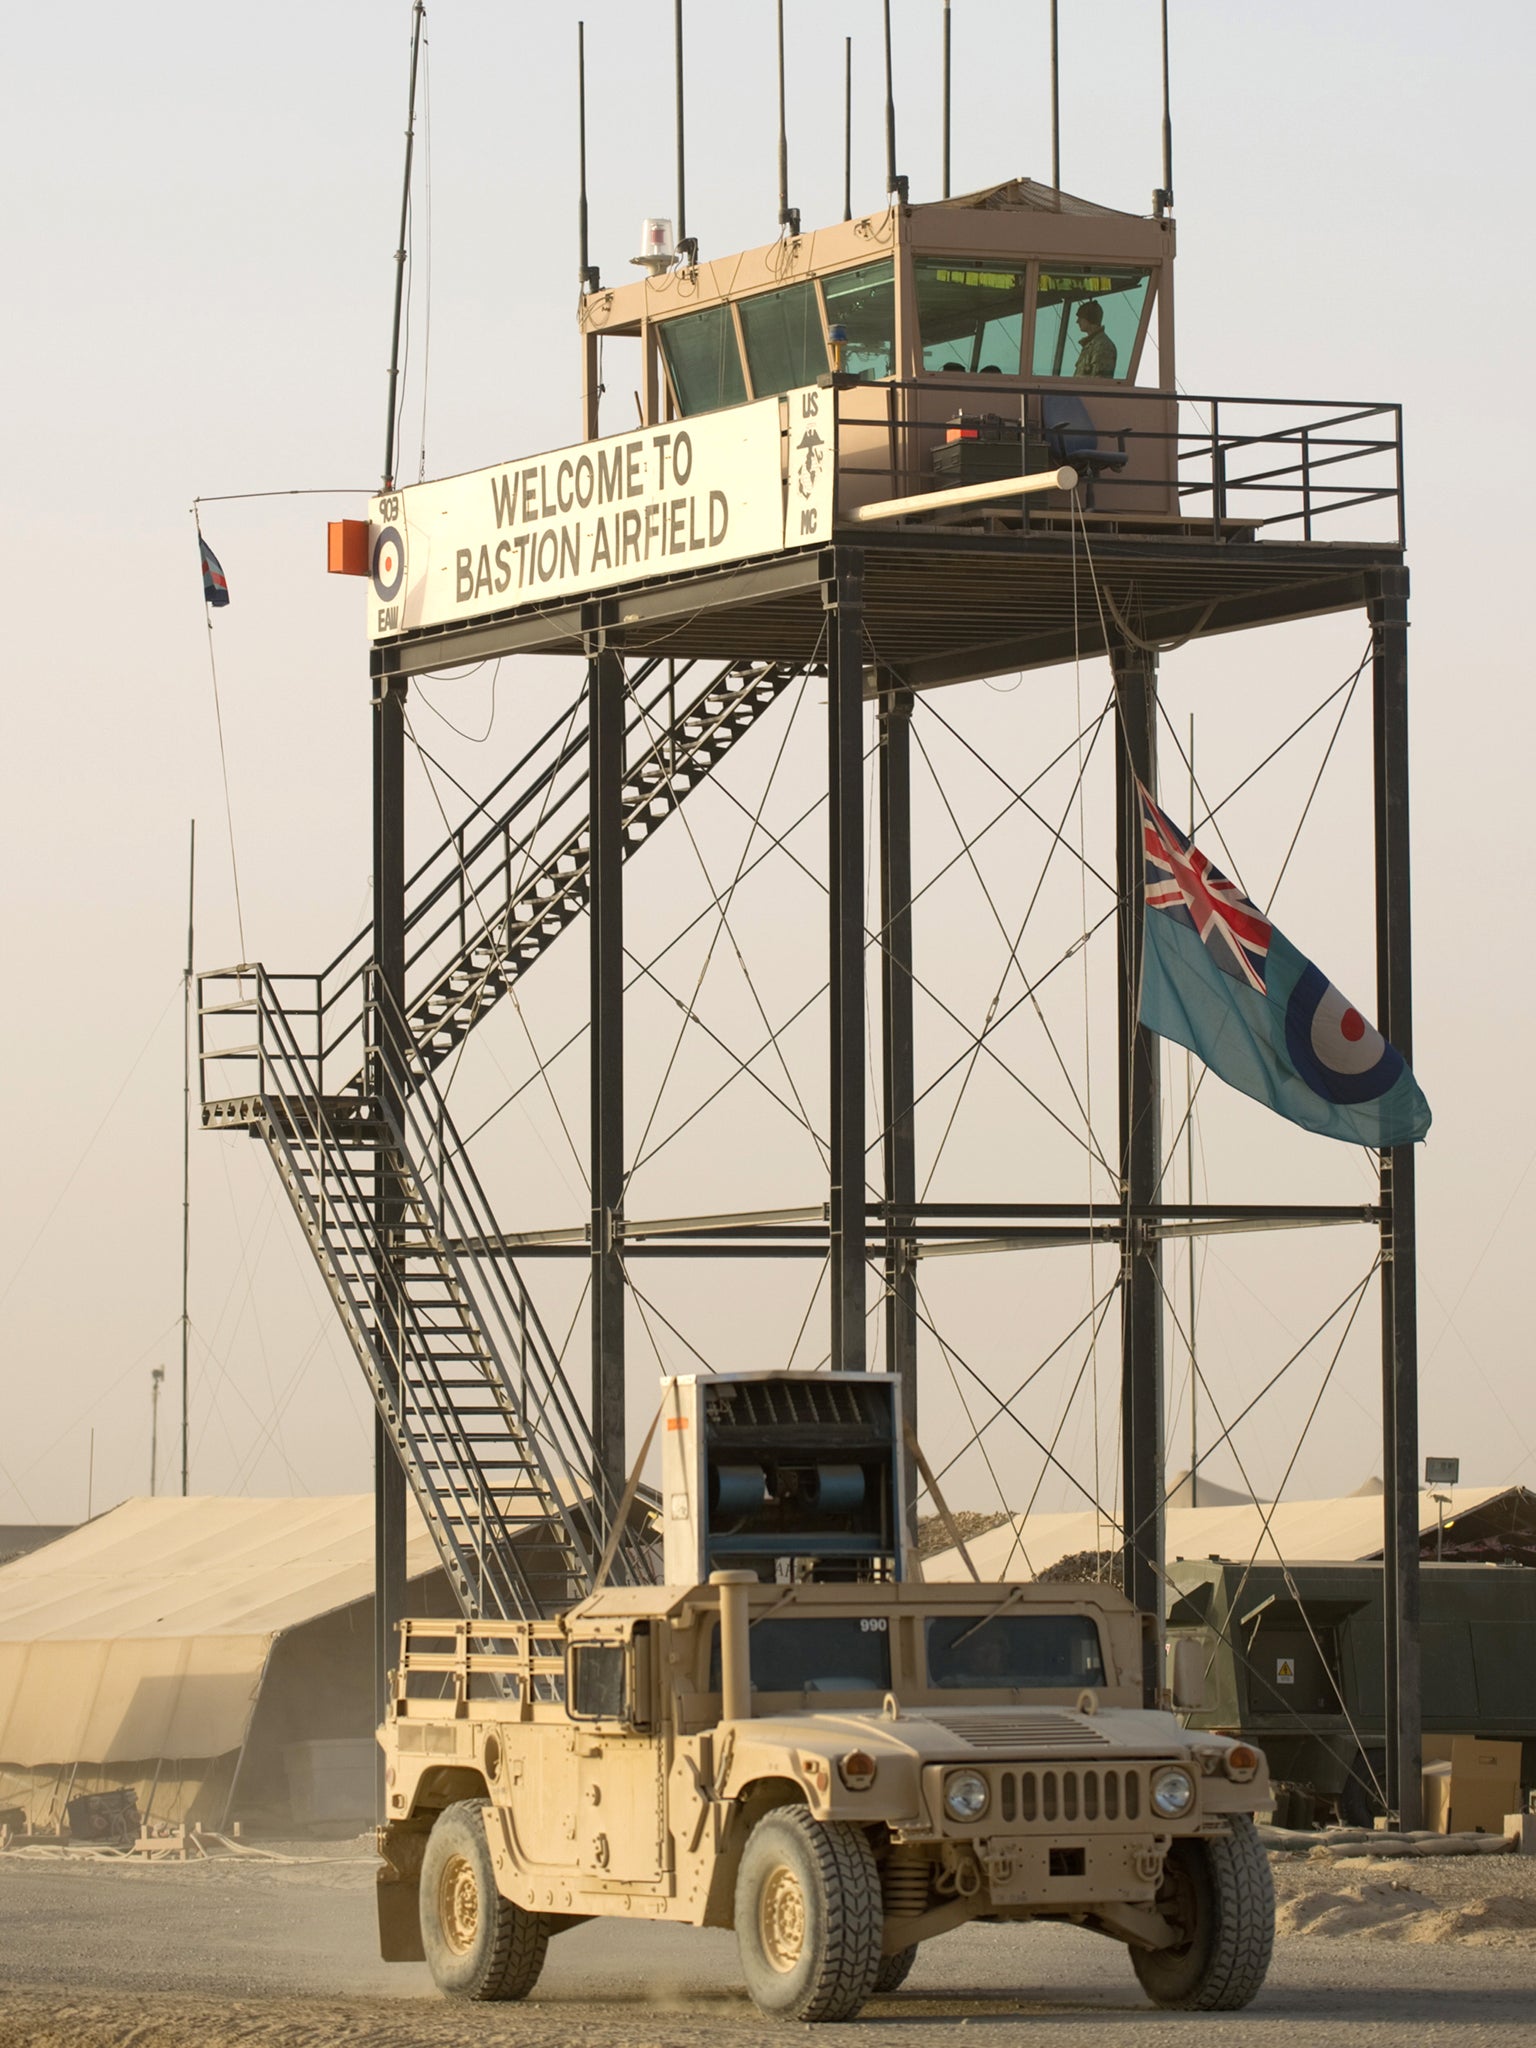 The move to transfer detainees comes after allegations that up to 90 Afghans were being held 'illegally' at Camp Bastion